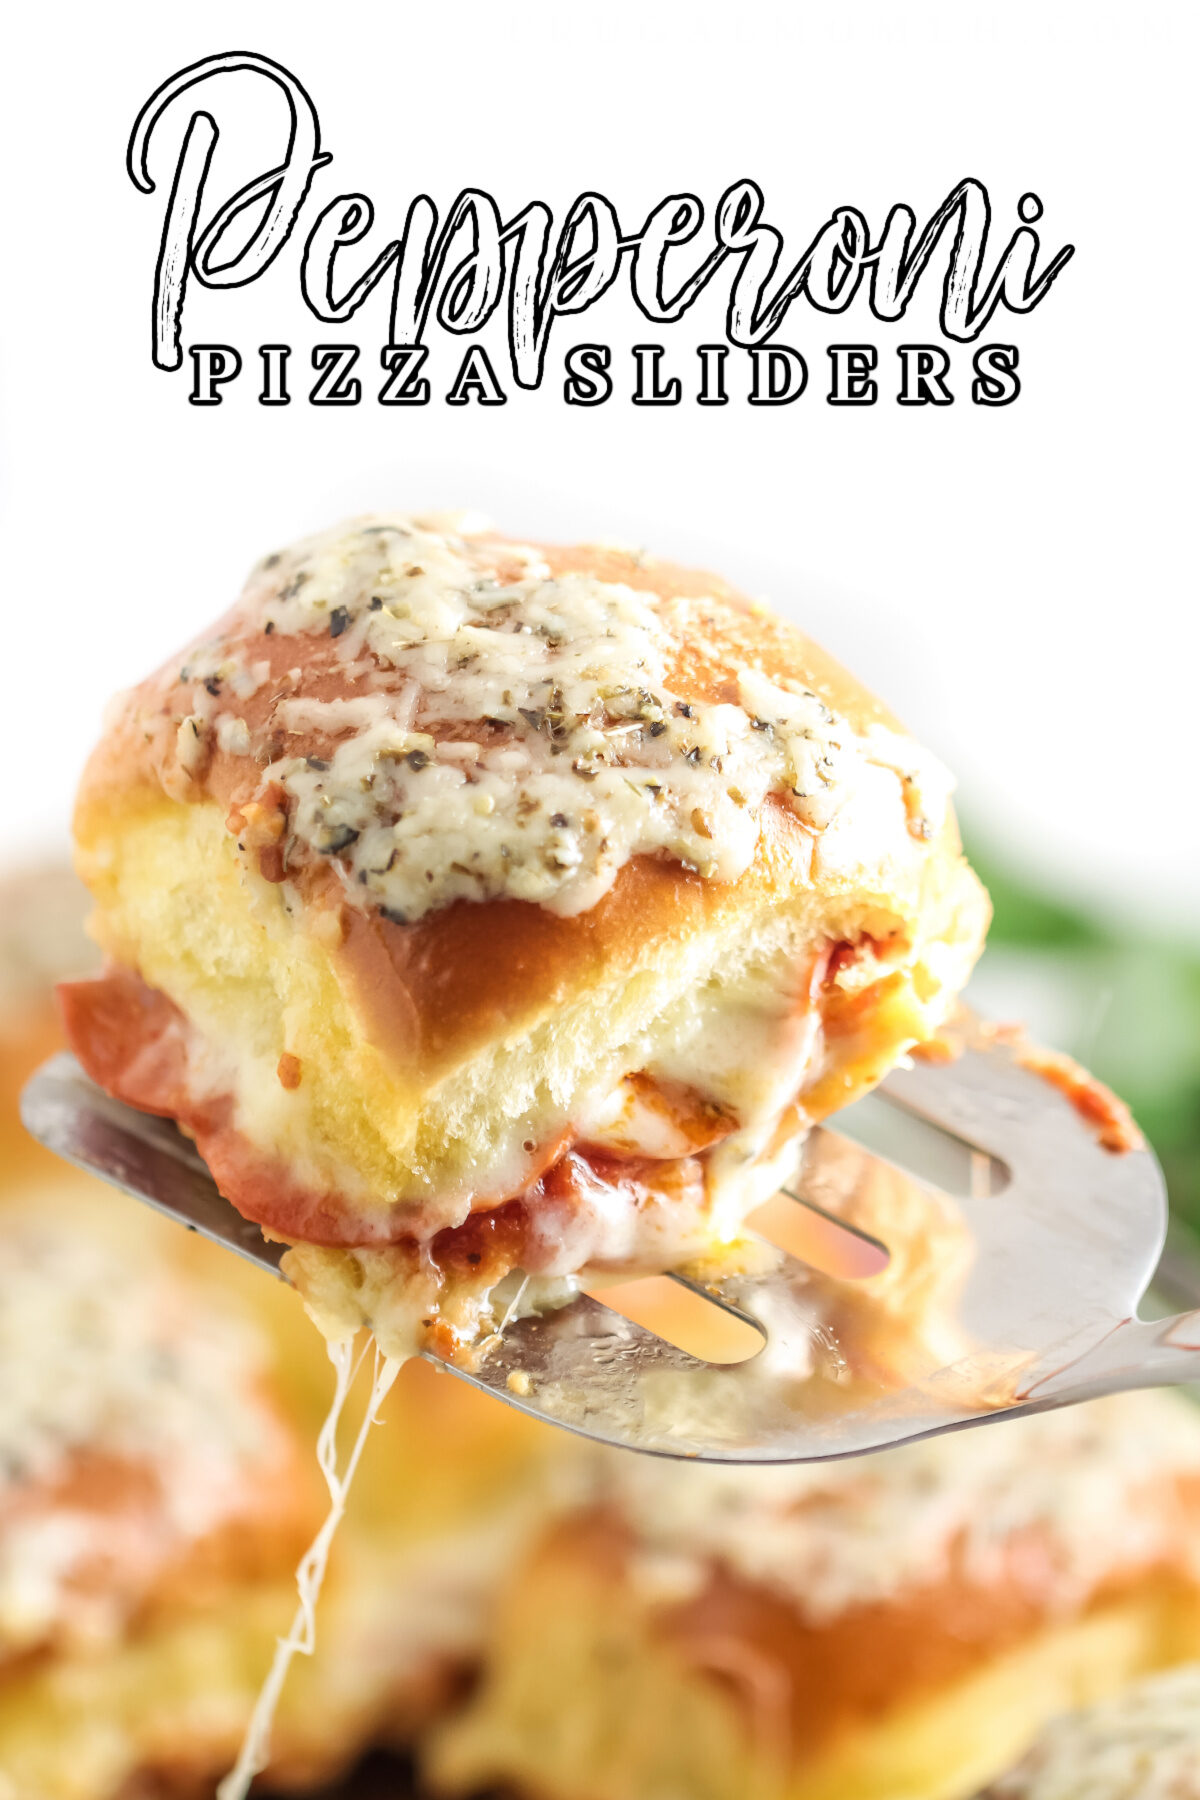 Pepperoni Pizza Sliders are the perfect party food! They're simple to make and everyone will love them. They make for a tasty lunch too!